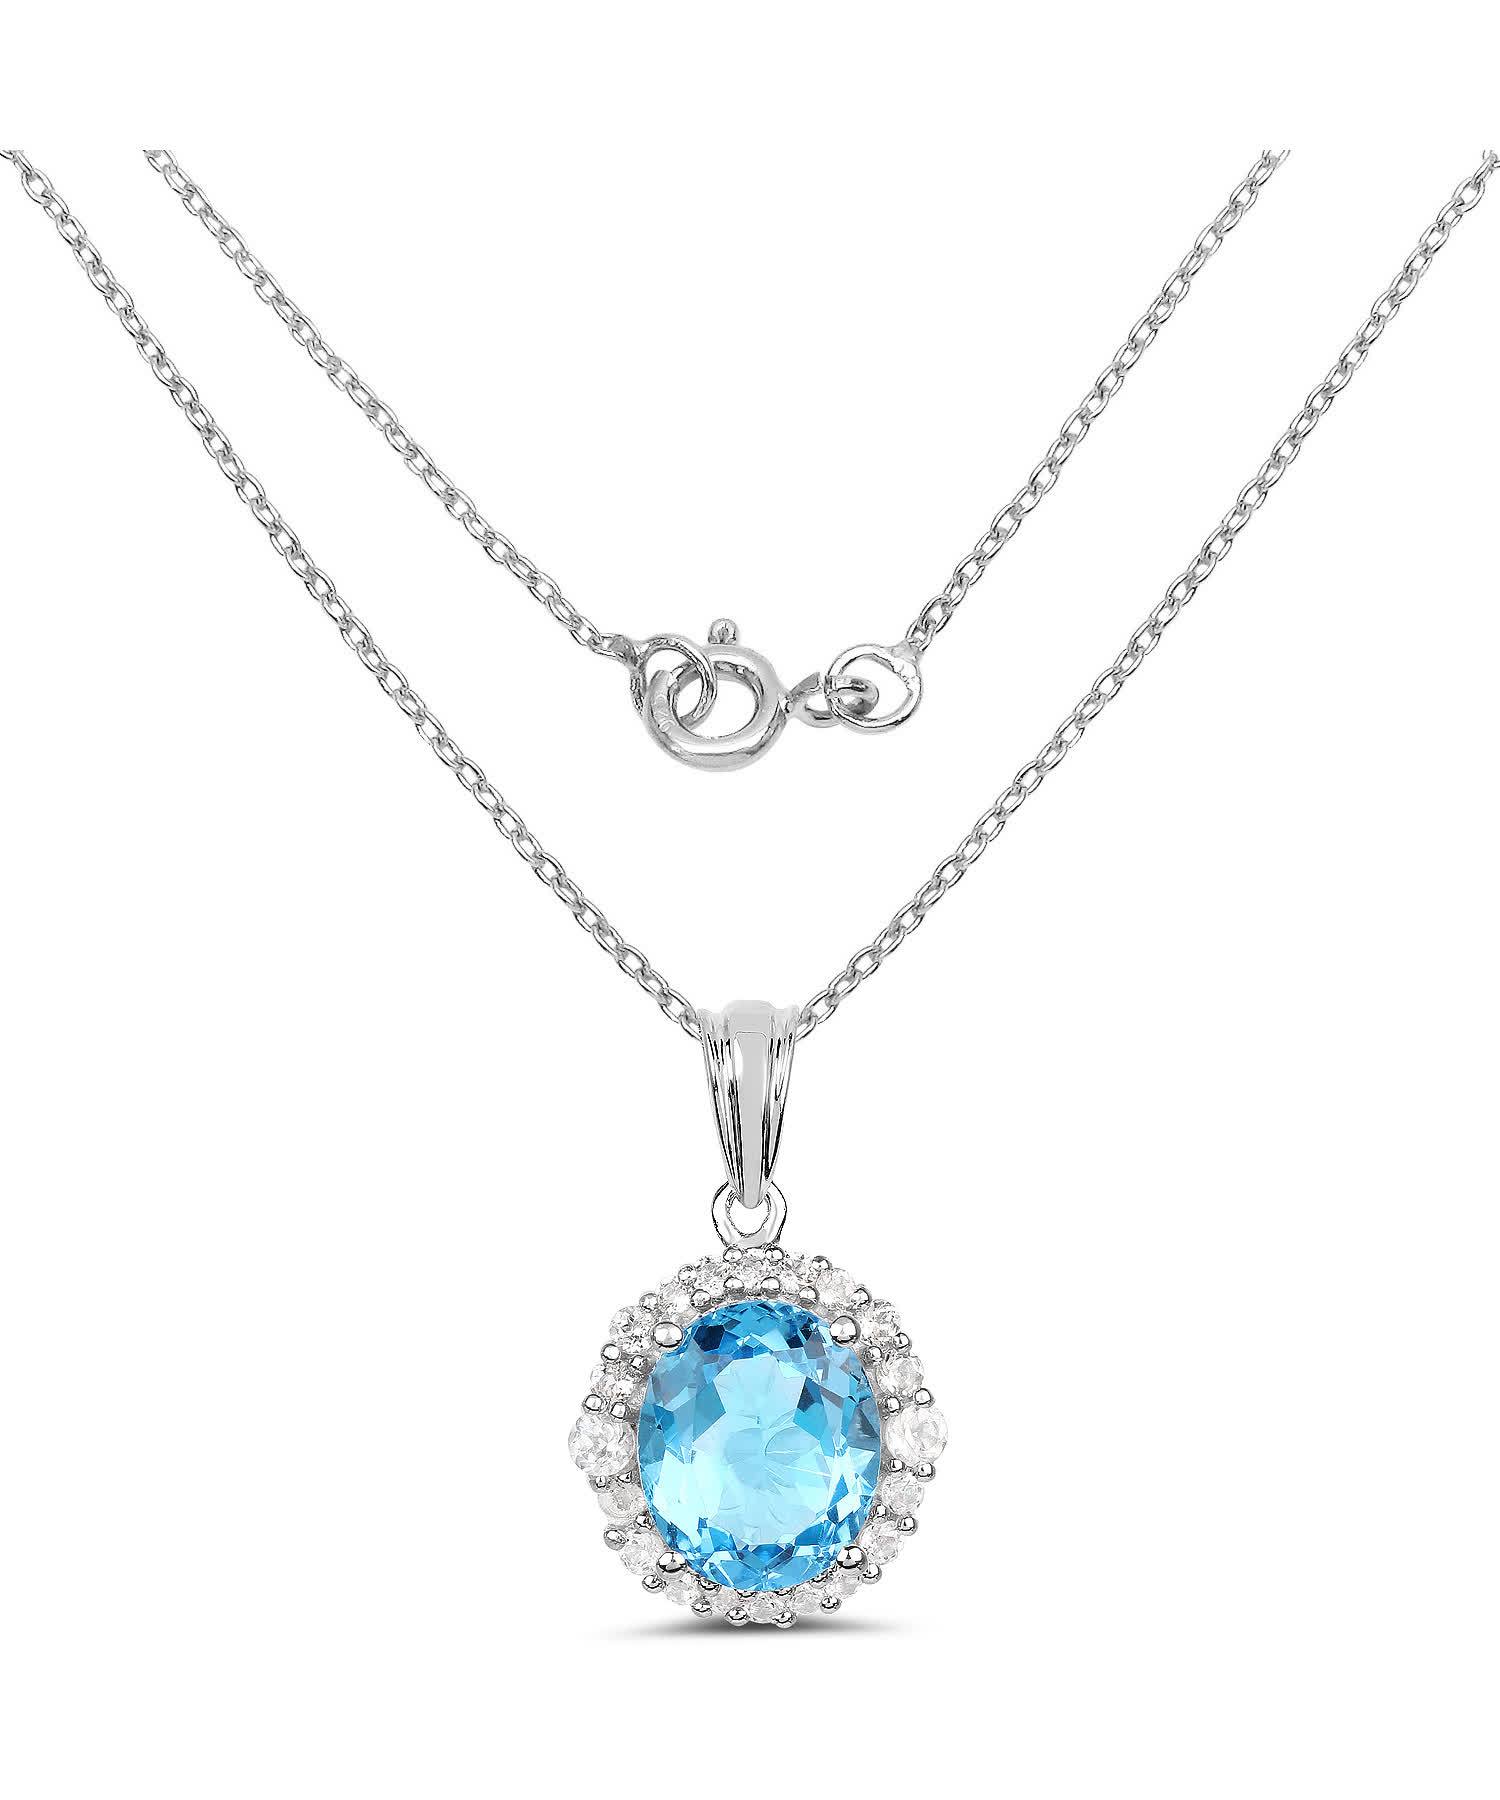 6.12ctw Natural Swiss Blue Topaz Rhodium Plated 925 Sterling Silver Halo Pendant With Chain View 2